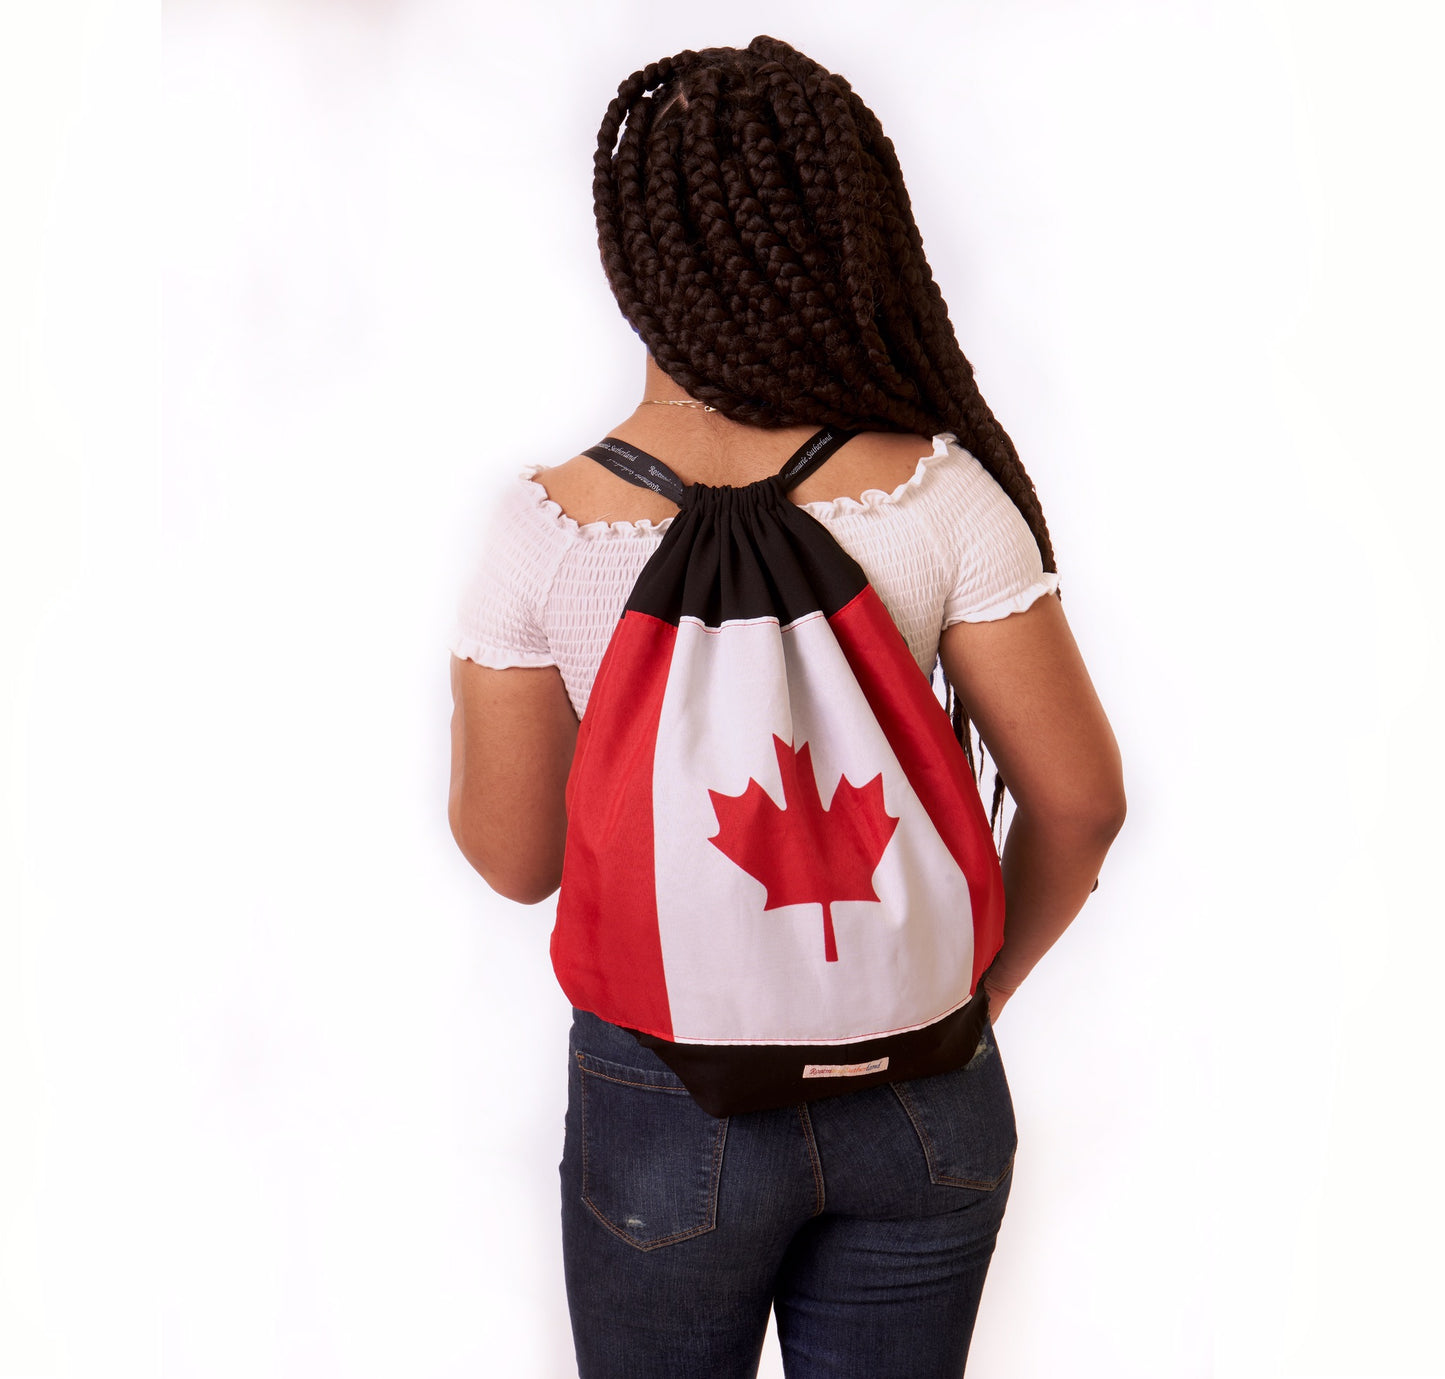 Patriot Pack Flag Backpack: Carry Your Country with Pride